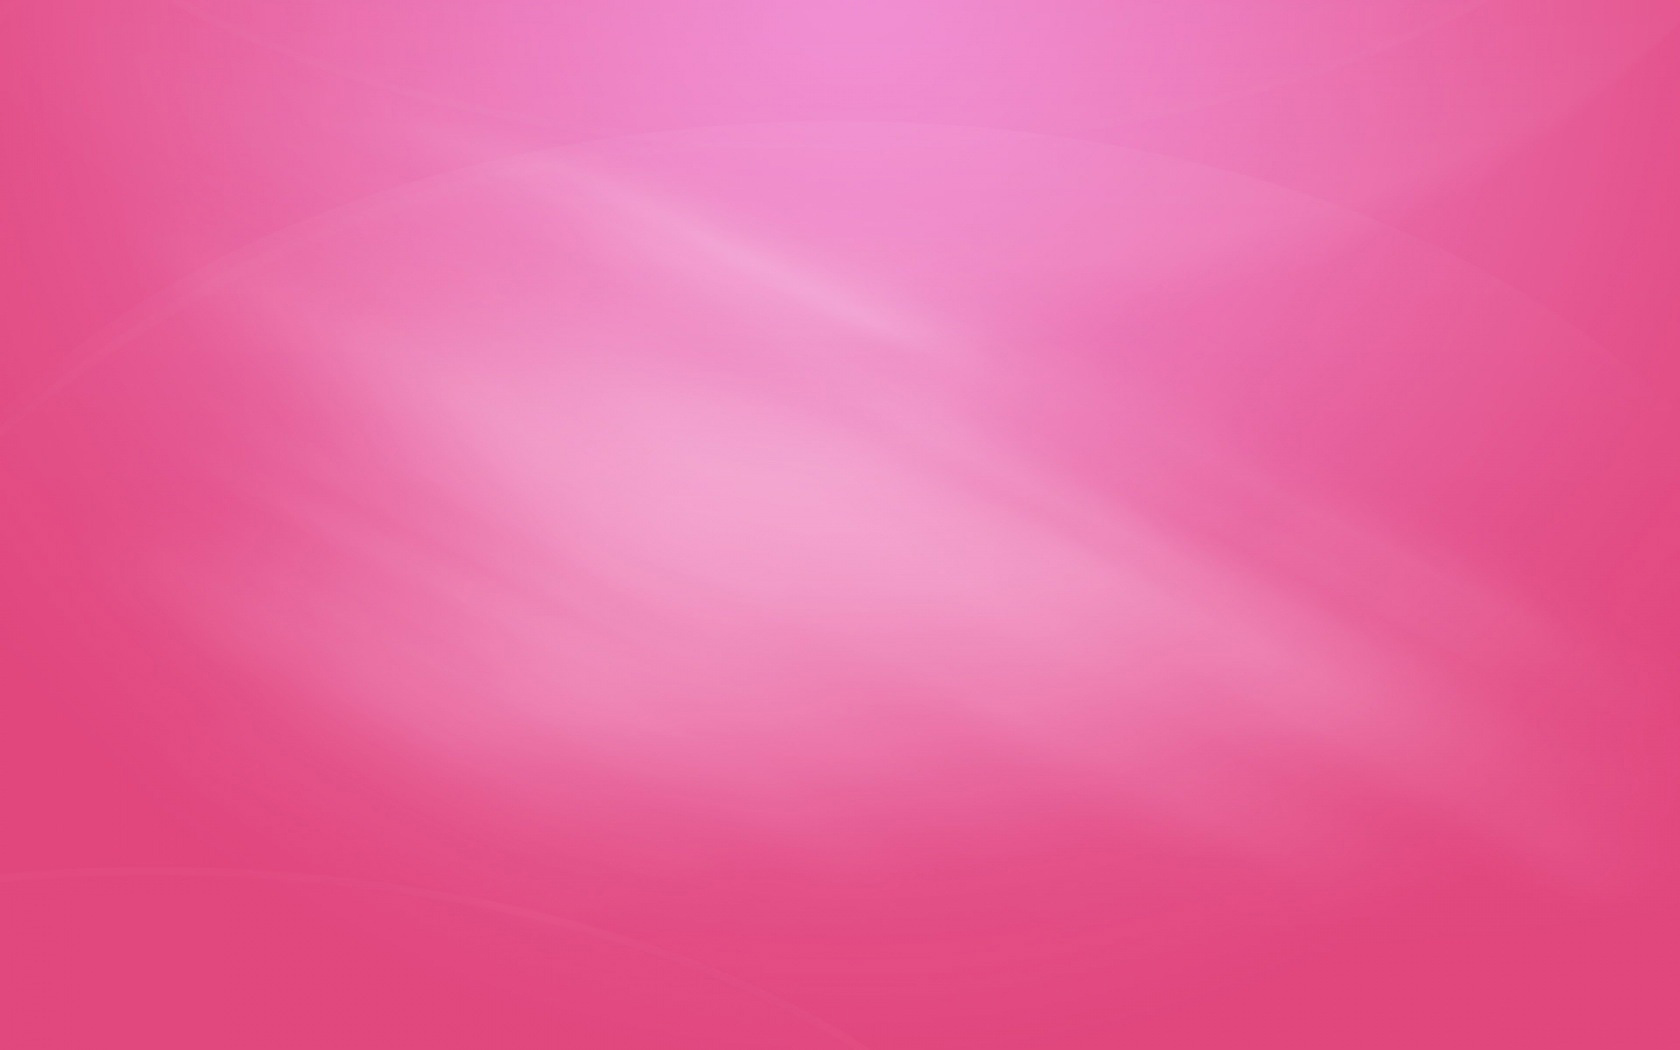 Windows 7 images Pink computer background HD wallpaper and 1680x1050